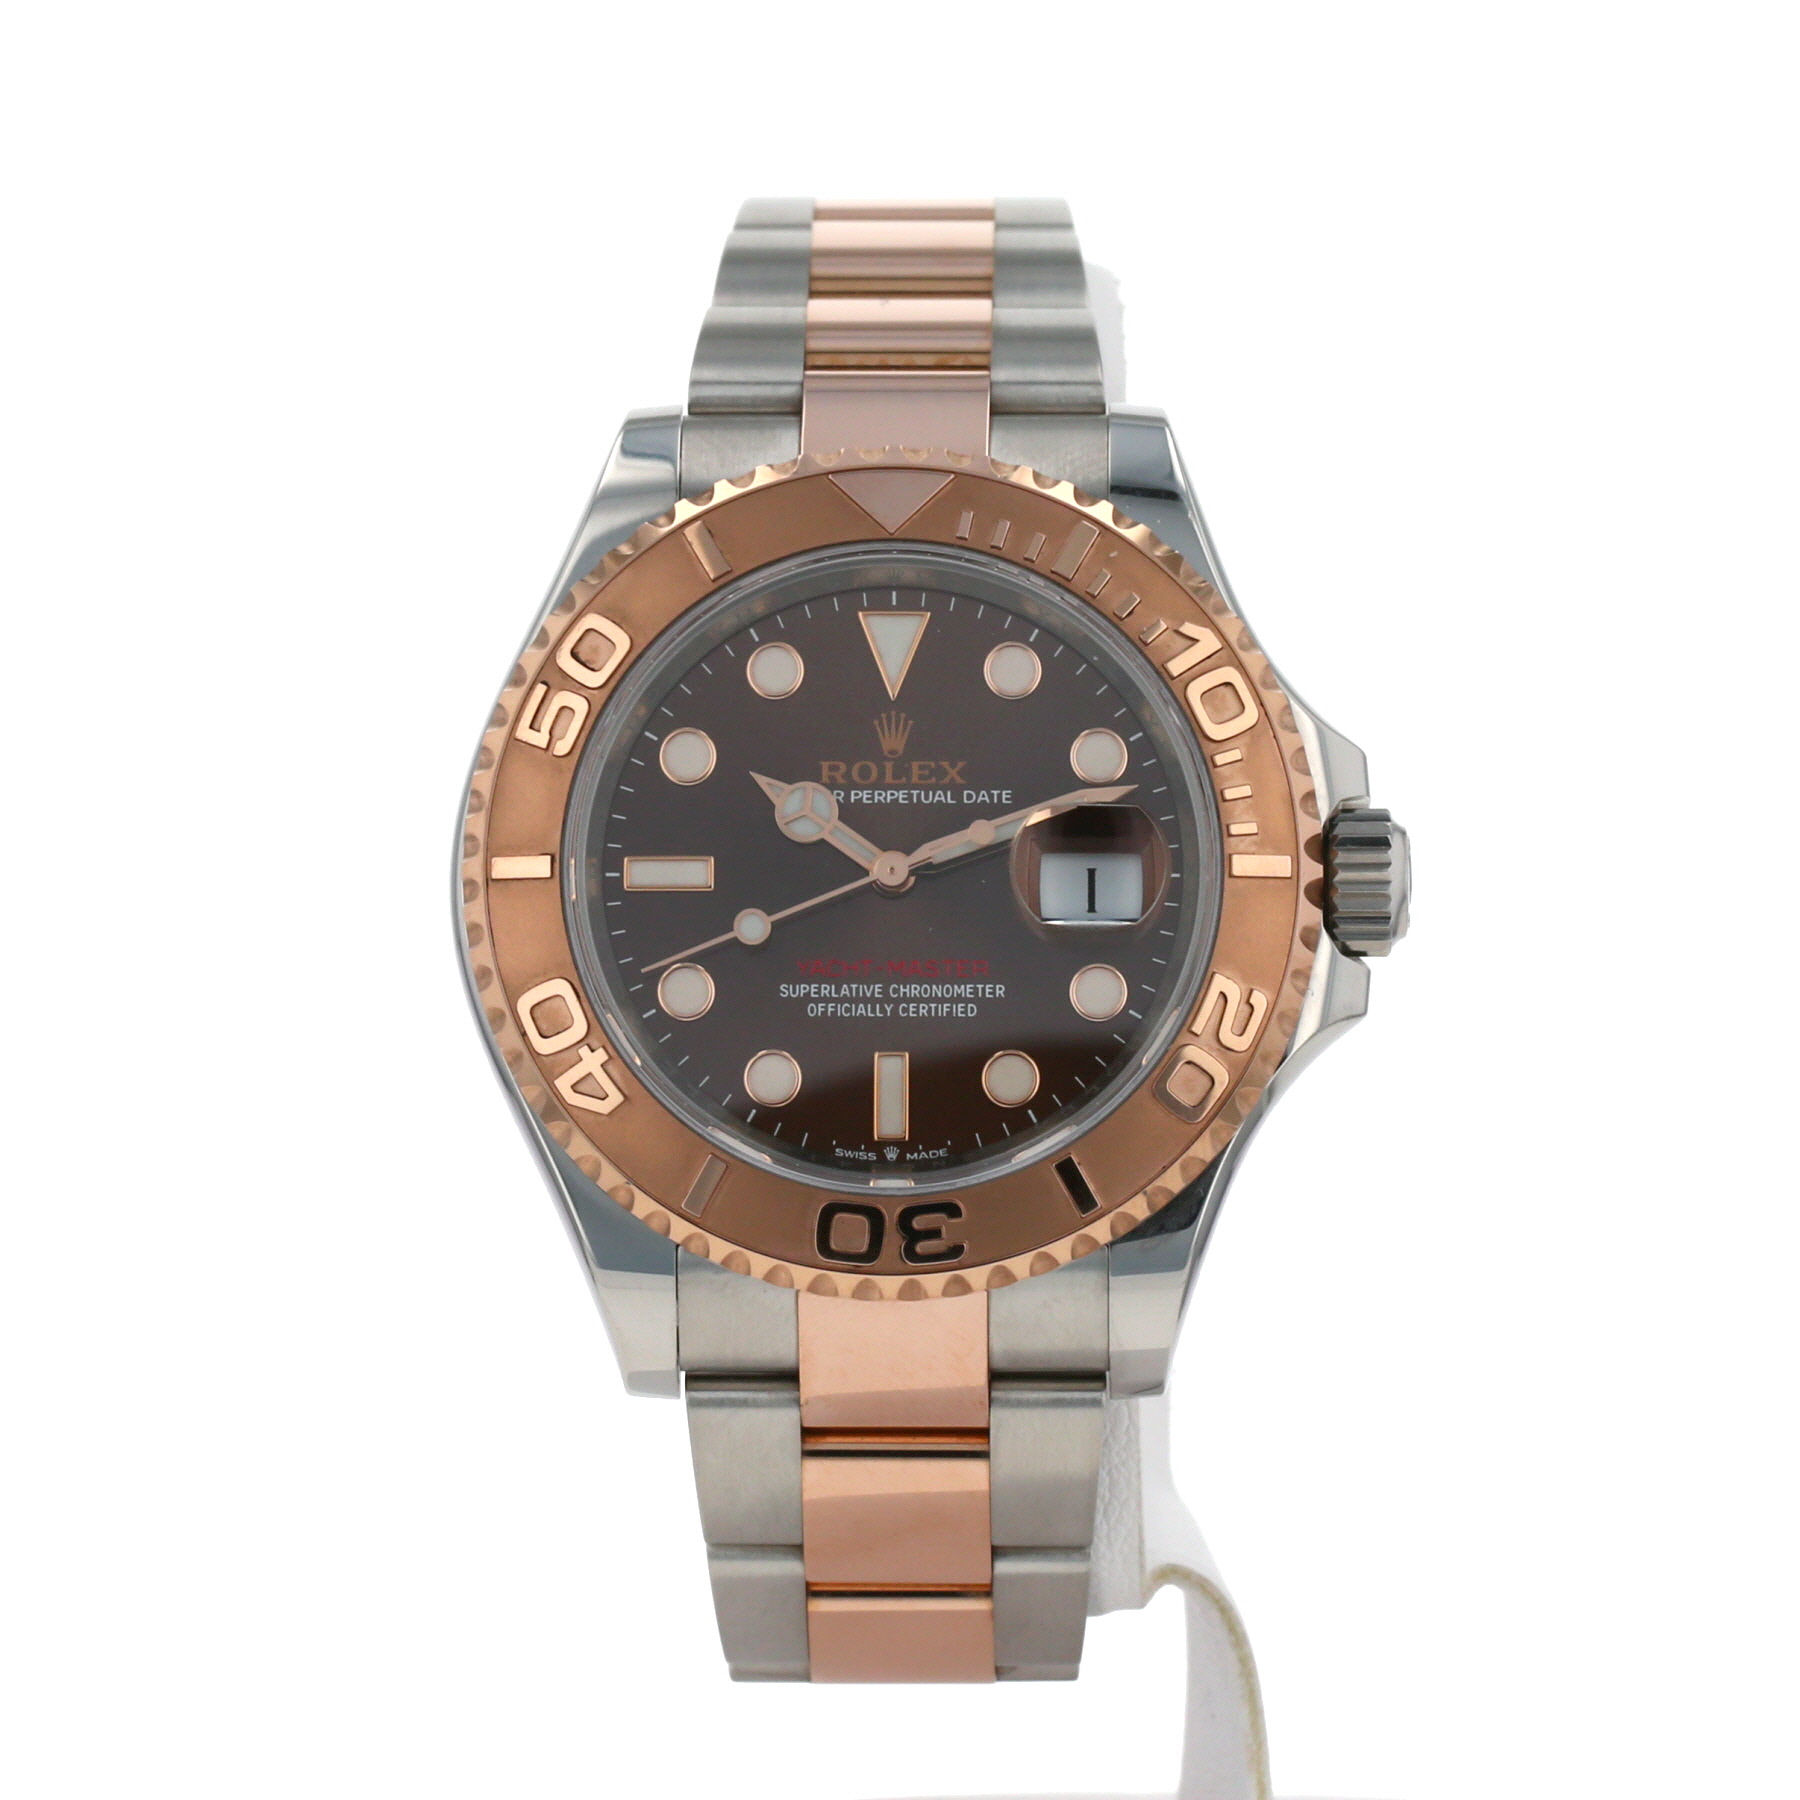 Yacht-Master In And Stainless Steel Ref: 126621